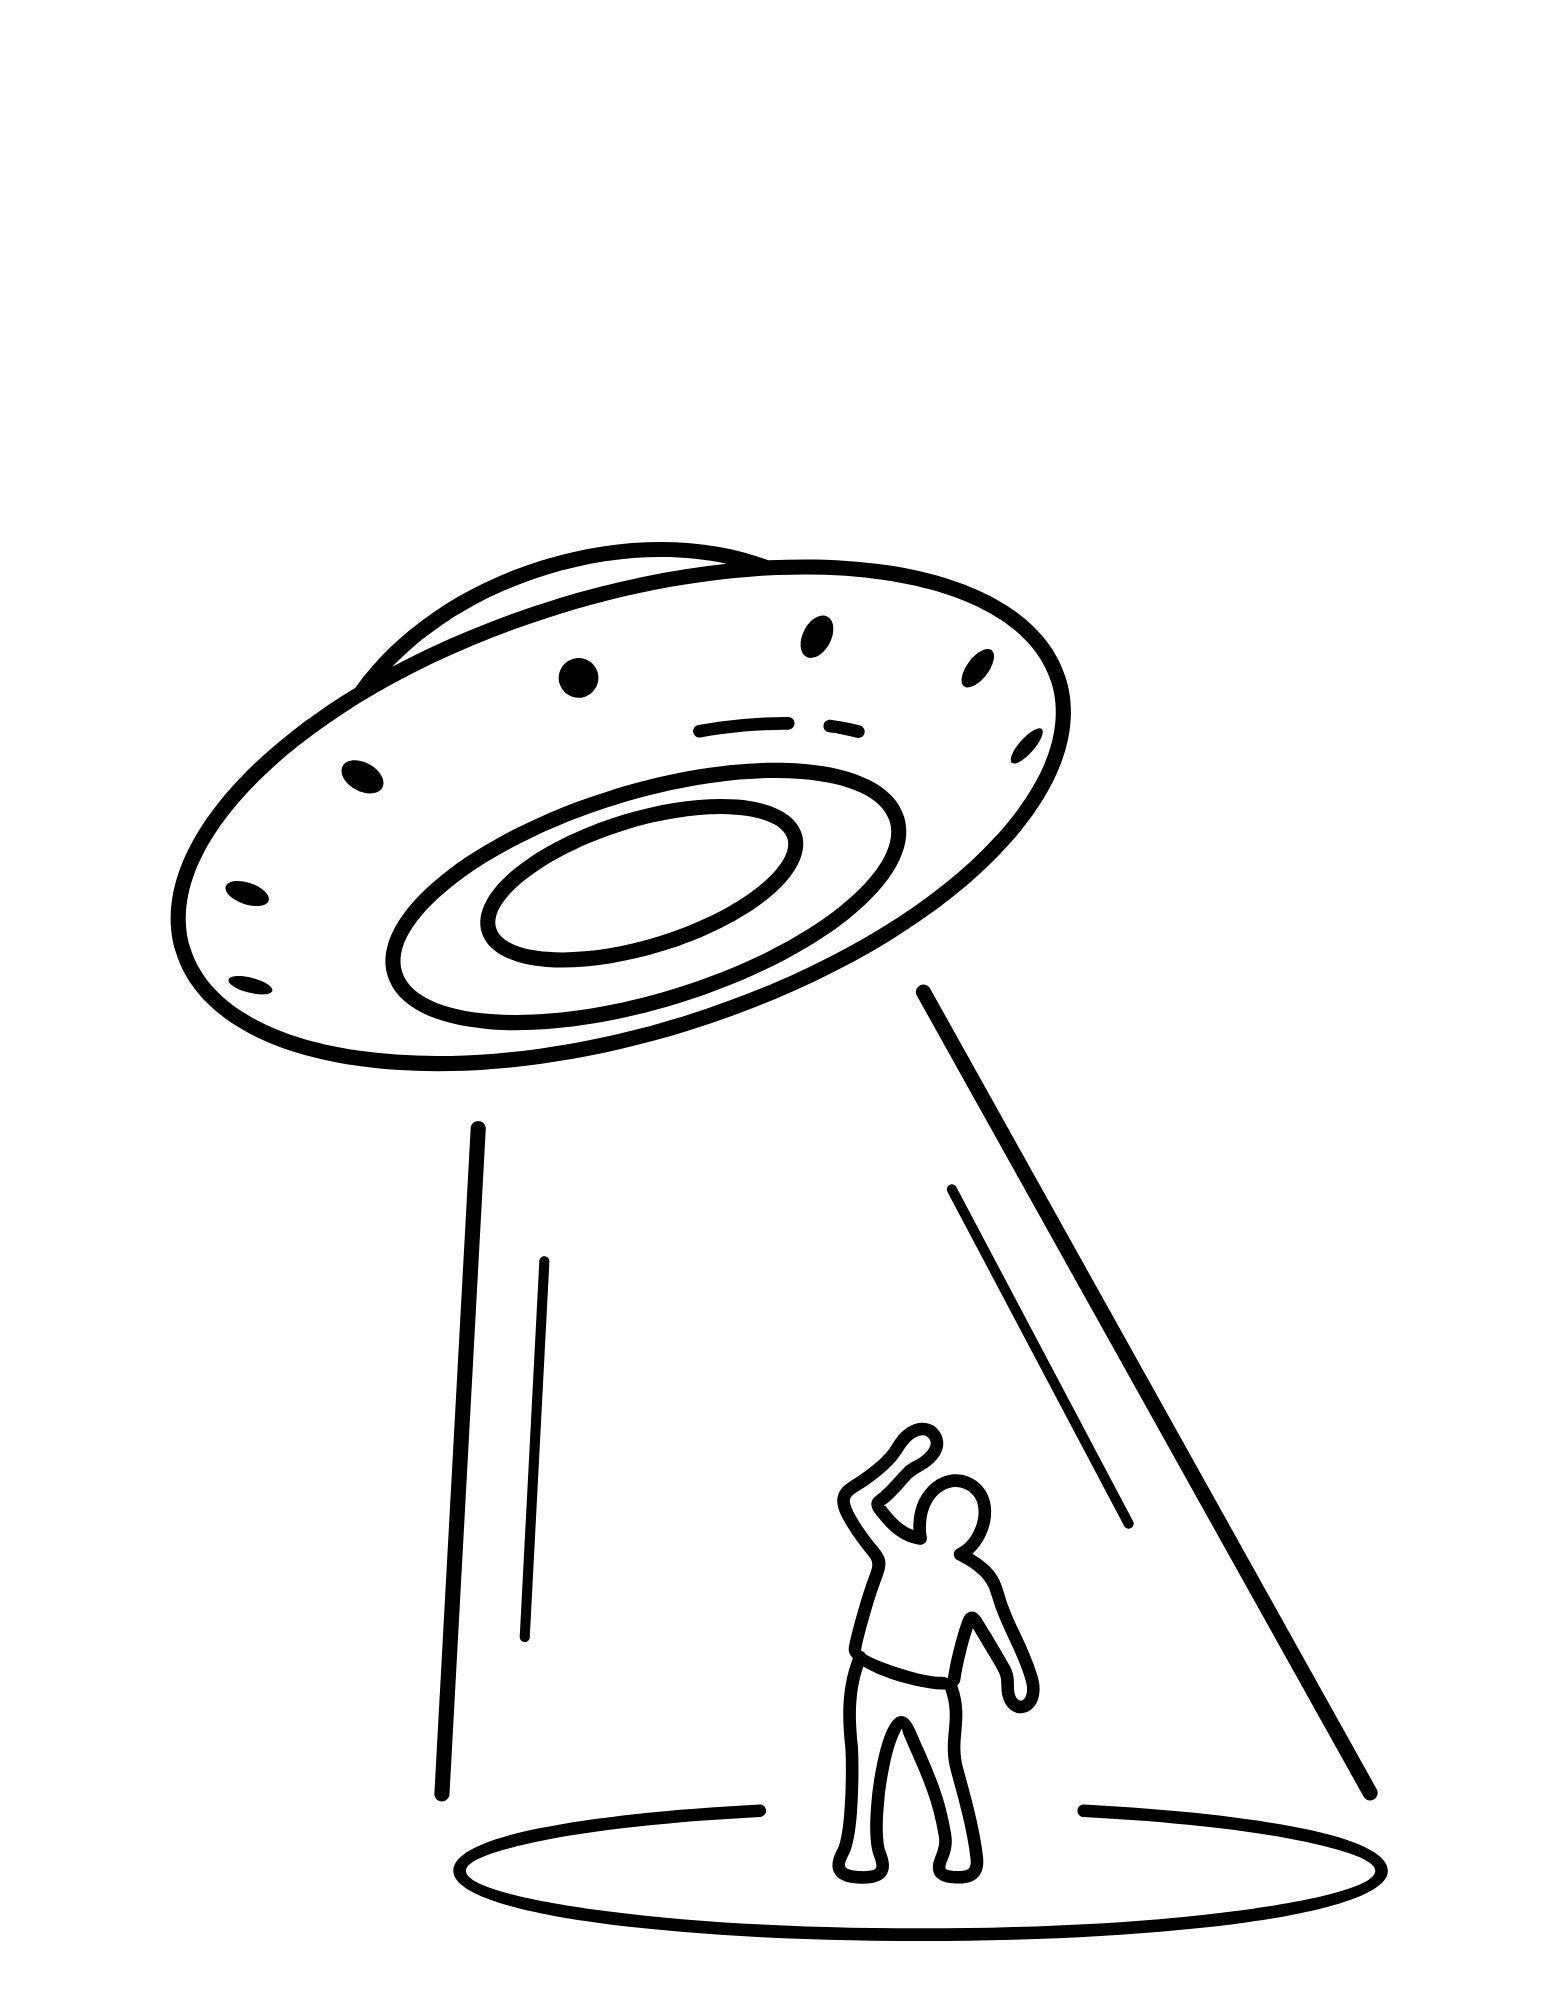 UFO UAP Digital Coloring Pages Extraterrestrial & - Etsy